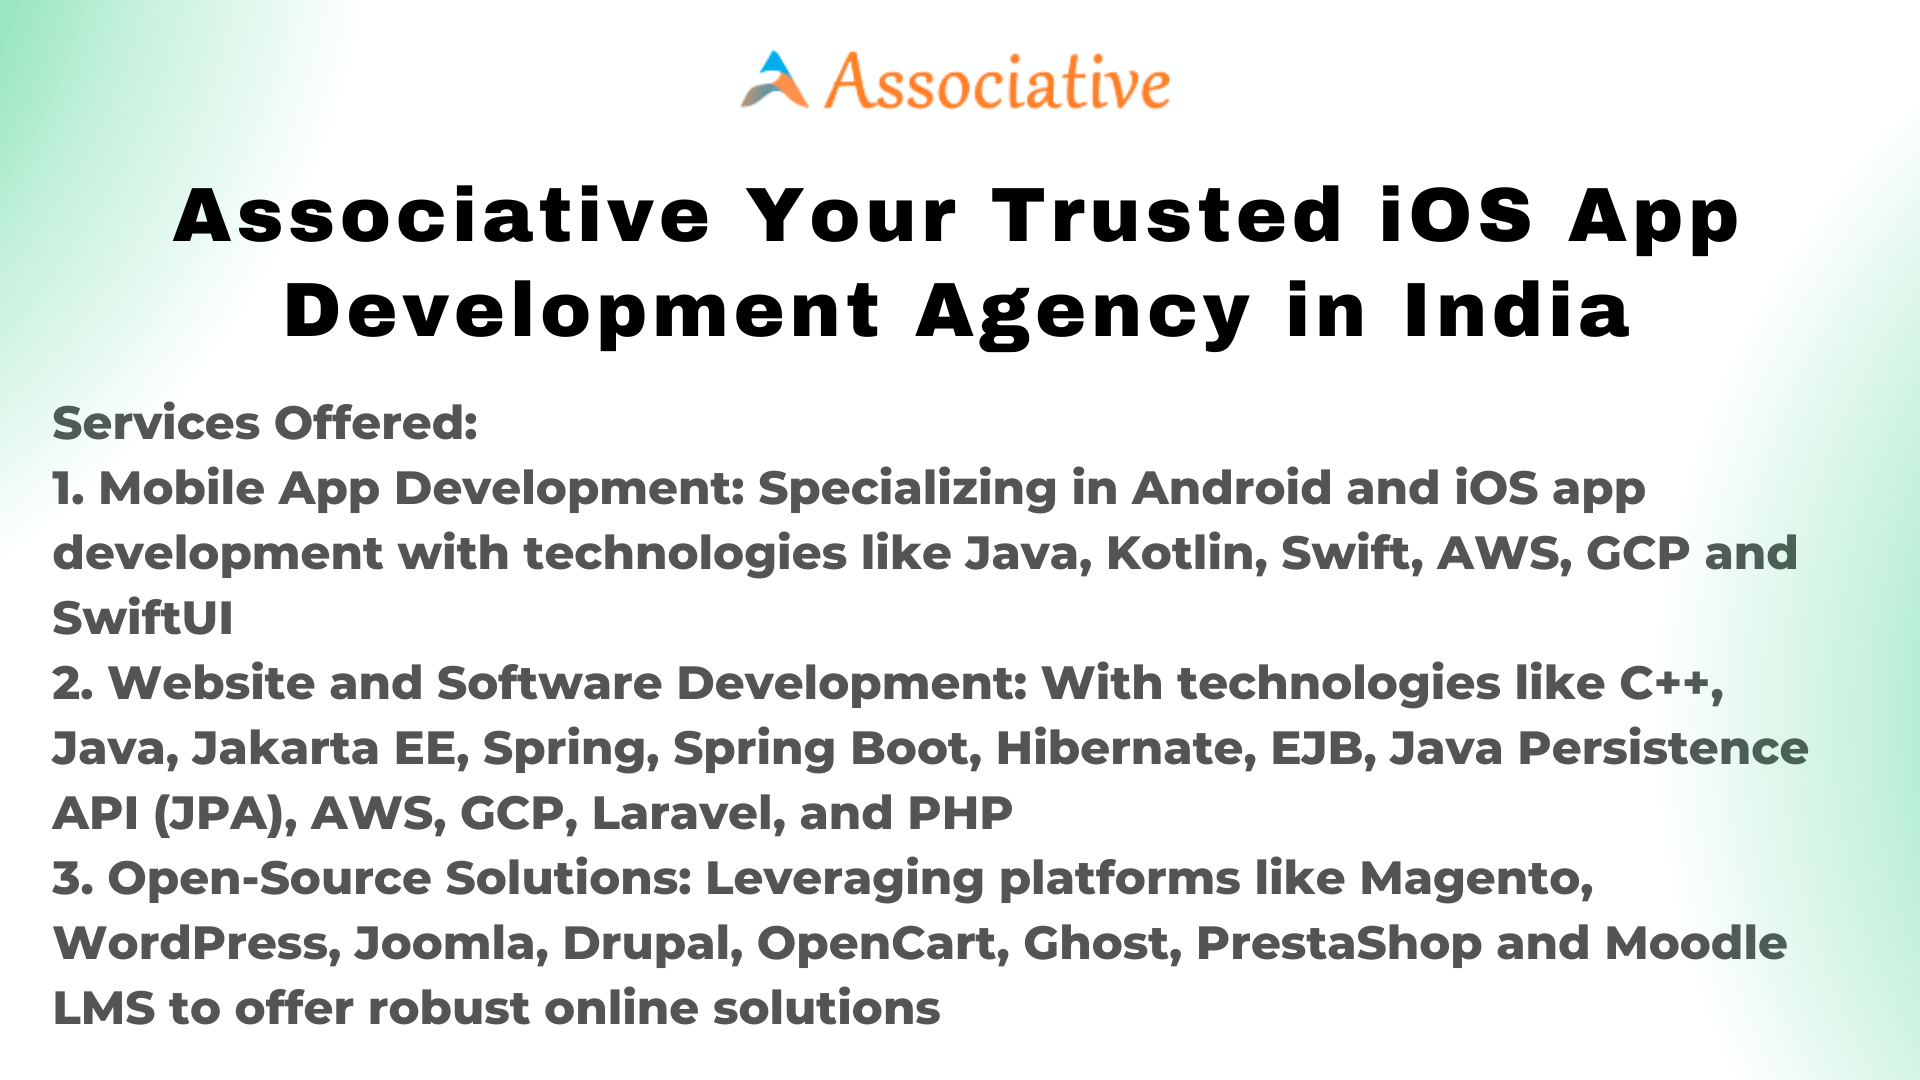 Associative Your Trusted iOS App Development Agency in India